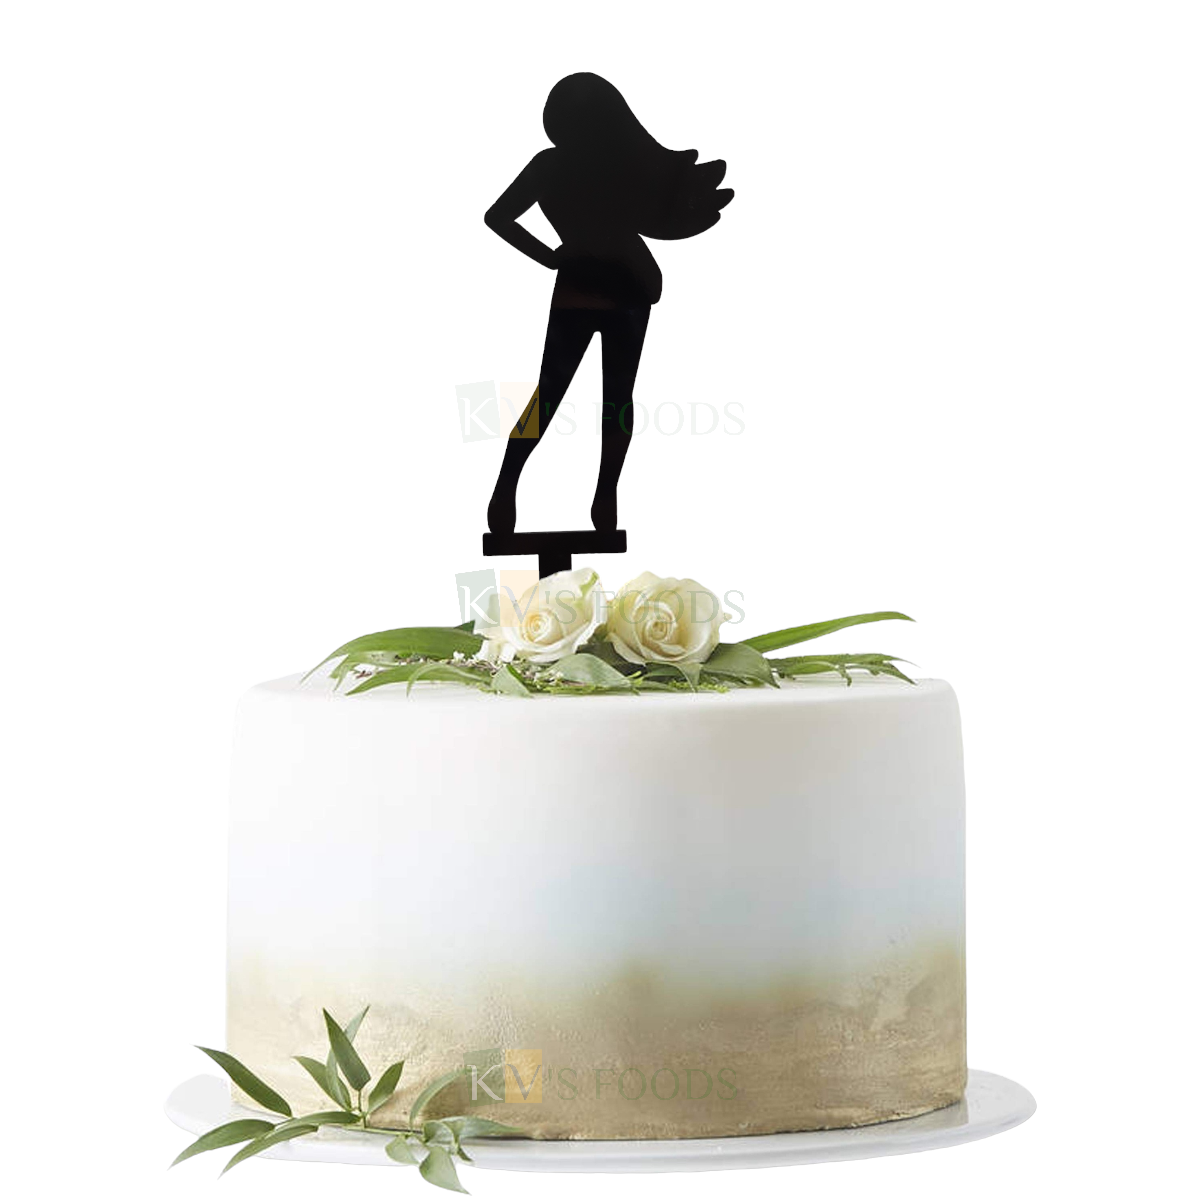 1PC Black Acrylic Beautiful Dancing Girl Topper Dancing Lady Cake Topper, Girl Happy Birthday Themed Cake Insert, Woman Birthday Silhouette Cake Topper DIY Cake Decoration